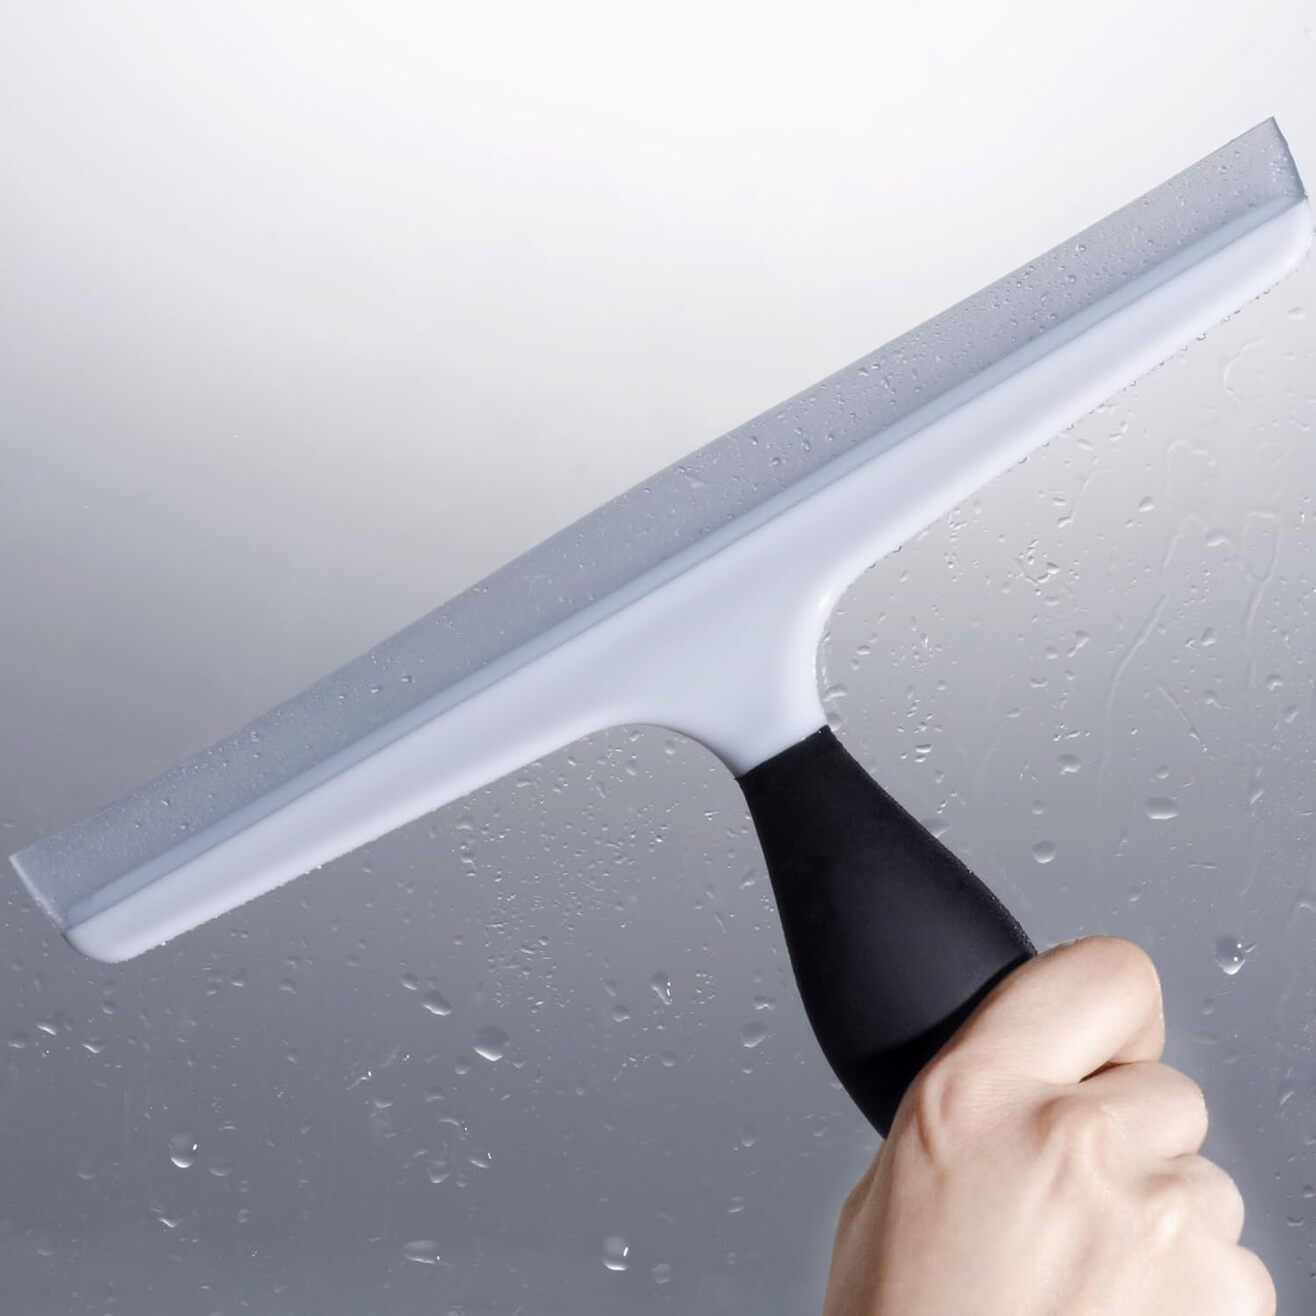 The-10-Best-Shower-Squeegee-Reviews-in-2021-TN